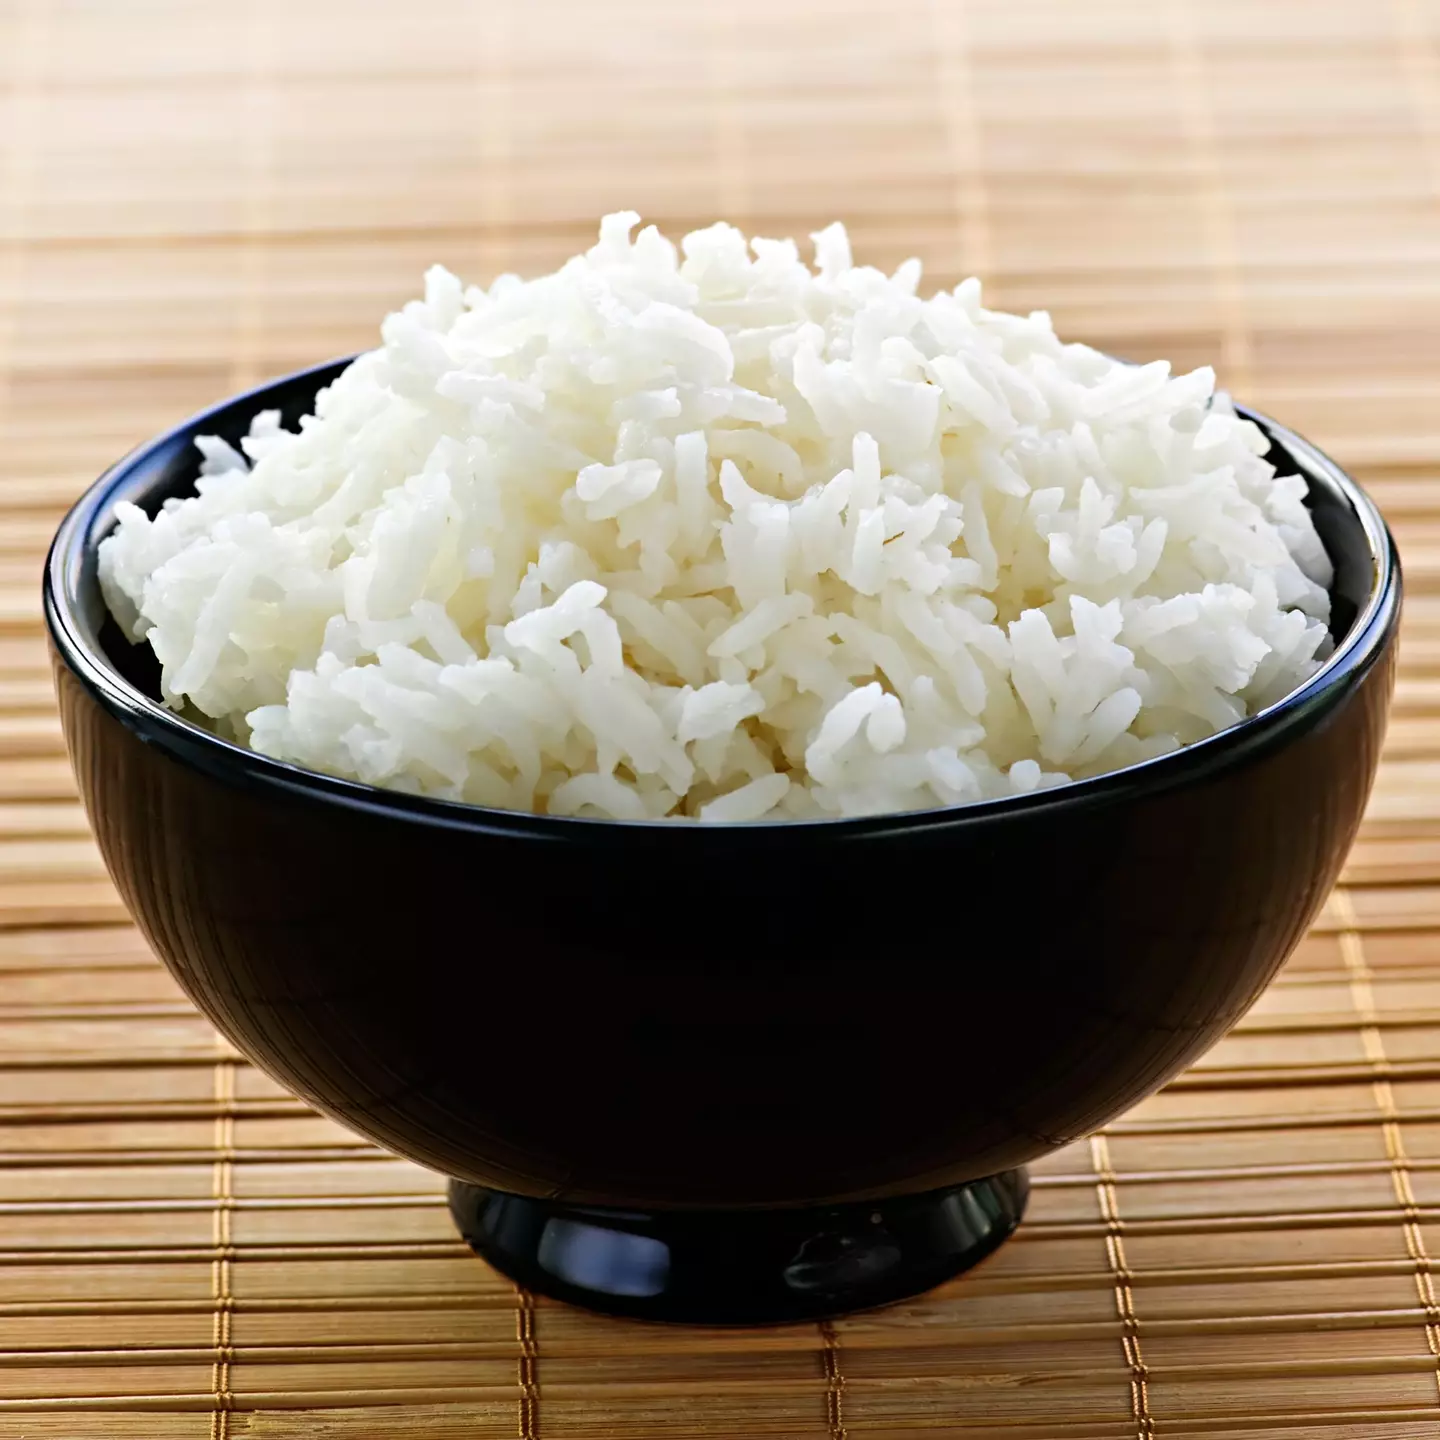 Rice can increase your risk of premature coronary artery disease.